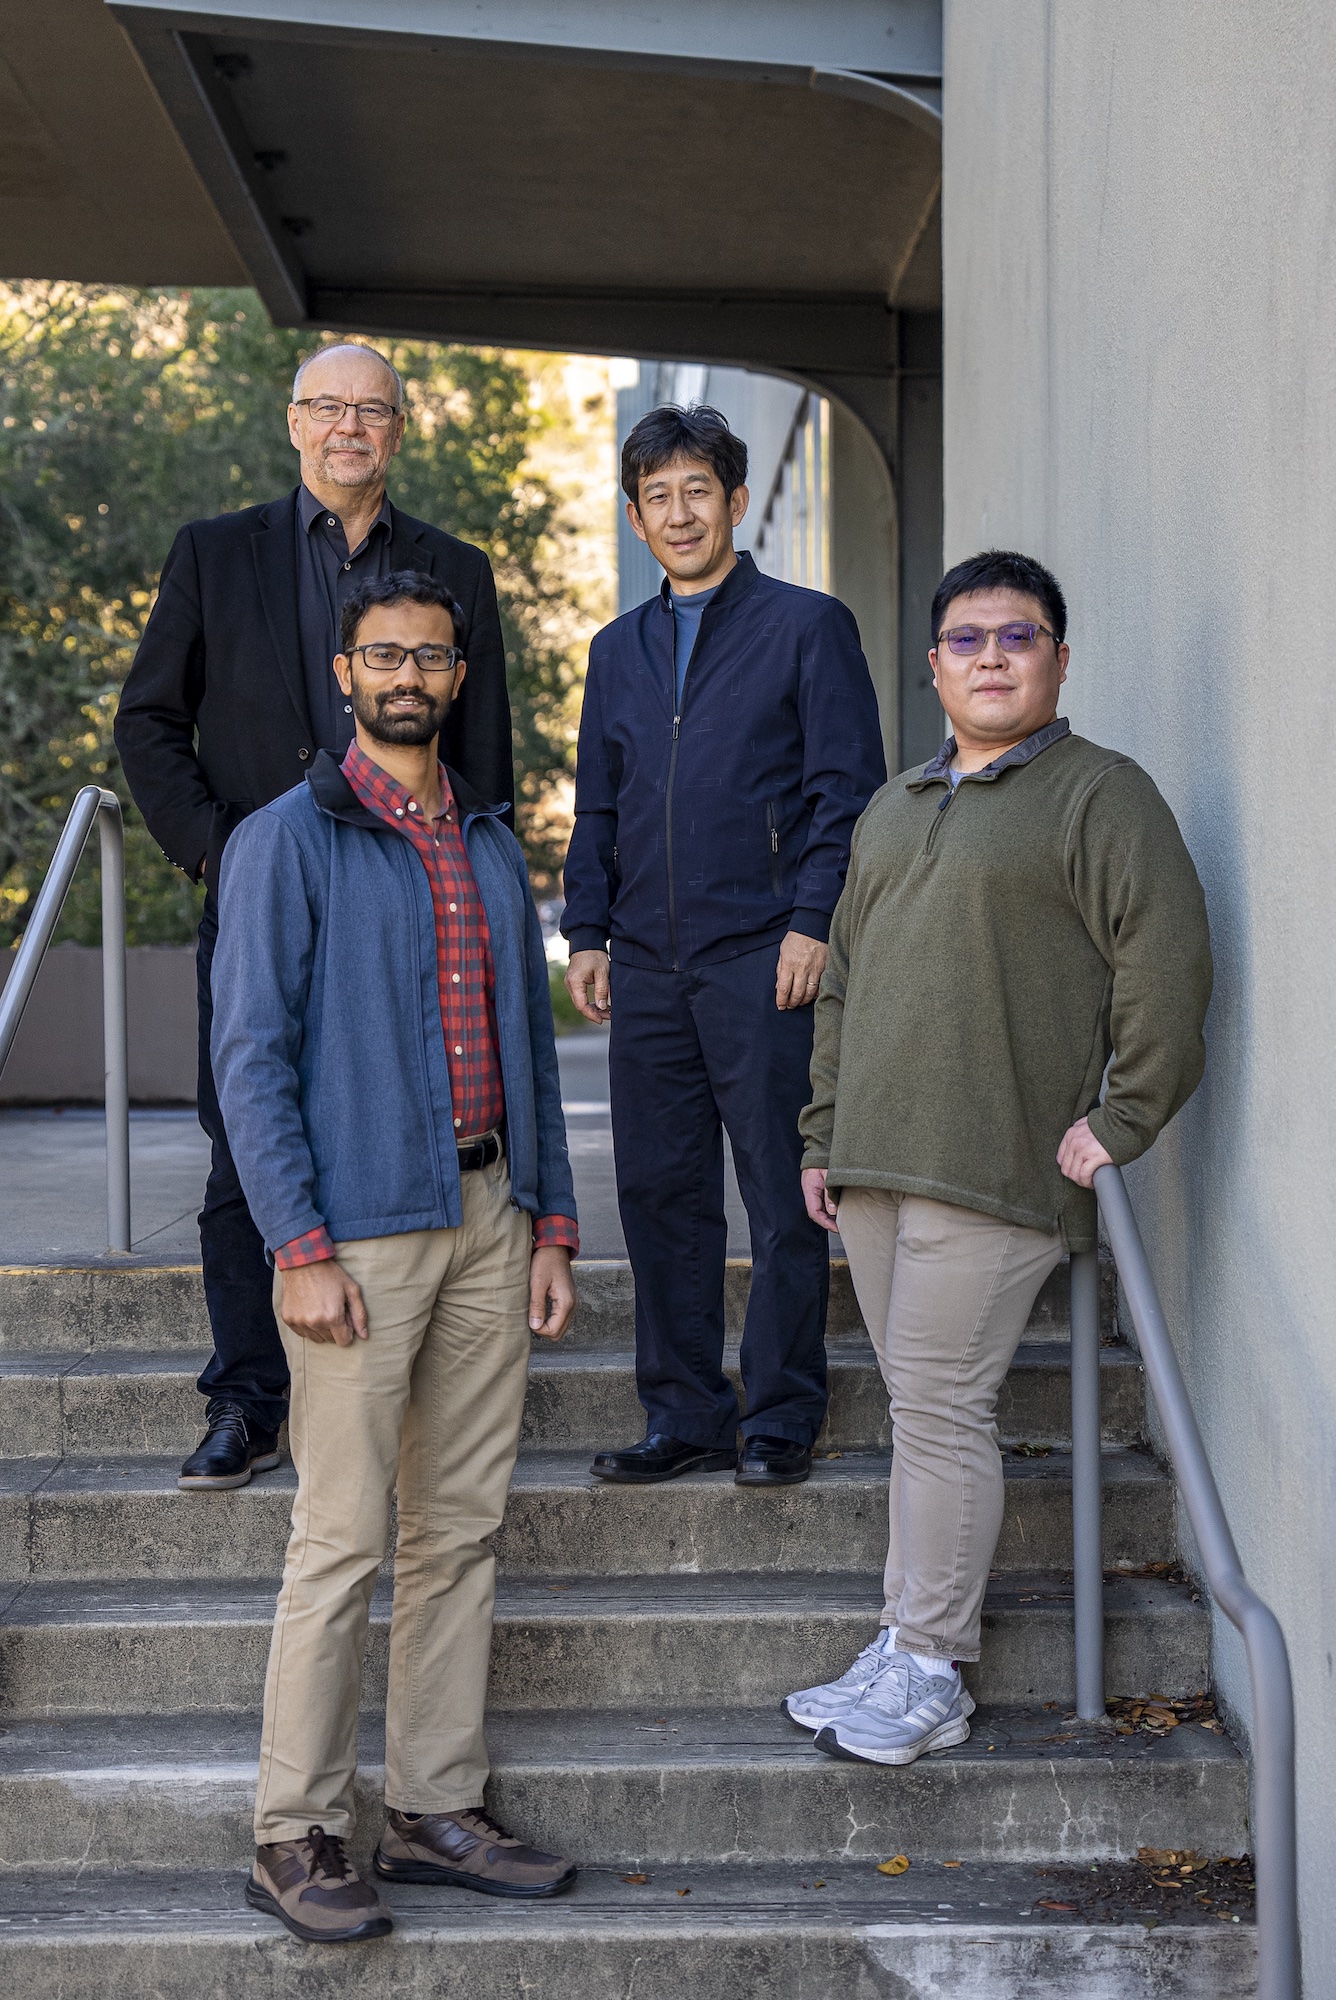 eam members (clockwise from top left) Robert Kostecki, Division Director, Energy Storage & Distributed Resources Division; Gao Liu, Principal Investigator, Liu Lab; Chen Fang, Postdoctoral Researcher; Muhammad Ihsan Ul Haq, Postdoctoral Researcher (Credit: Marilyn Sargent/Berkeley Lab)